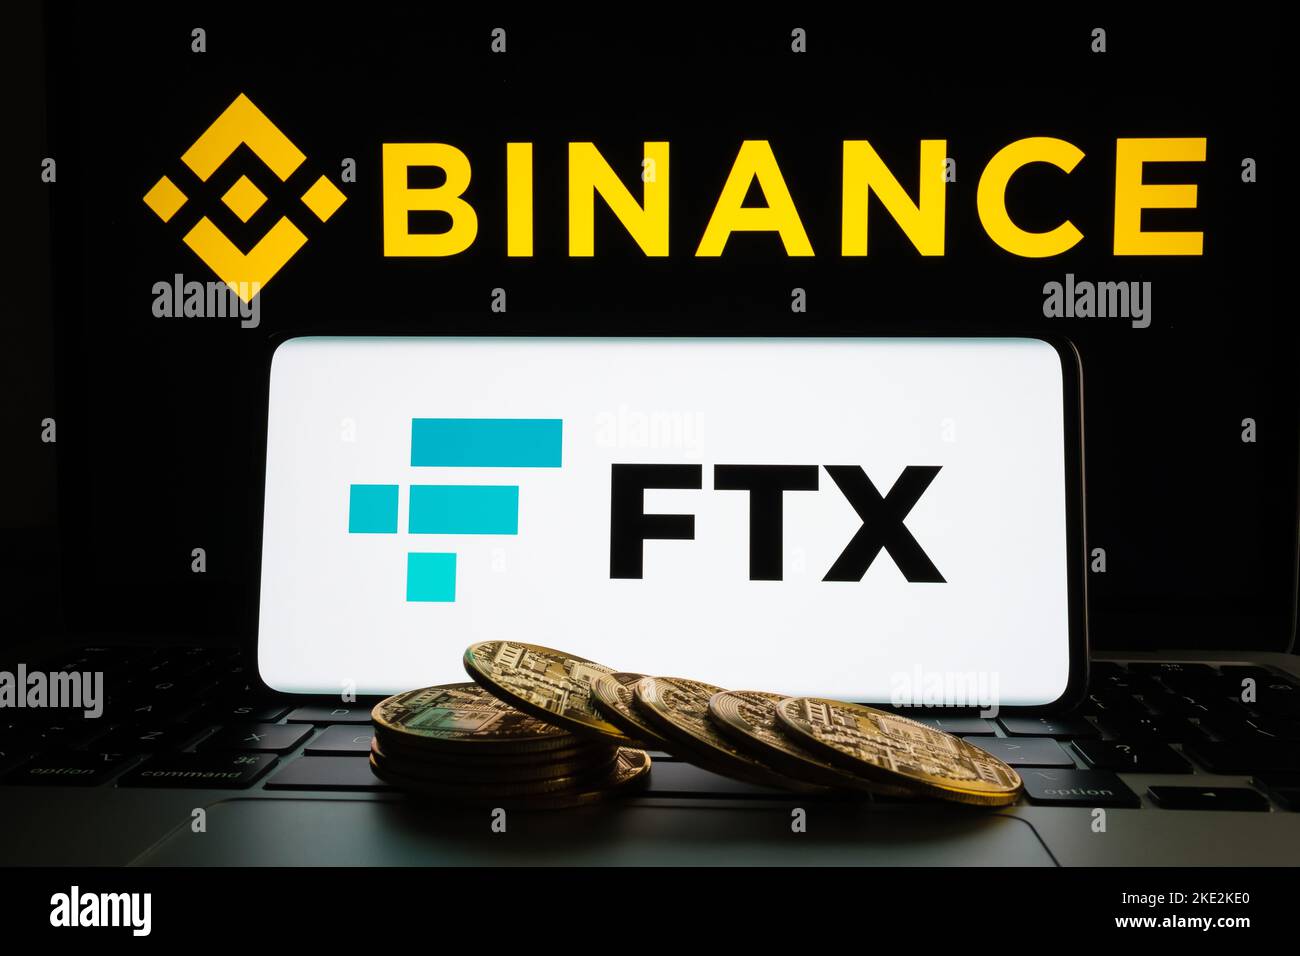 Binance and FTX Cryptocurrency Exchange merger concept. FTX logo seen on smartphone, fallen stack of bitcoin tokens, Binance logo on a laptop. Staffor Stock Photo